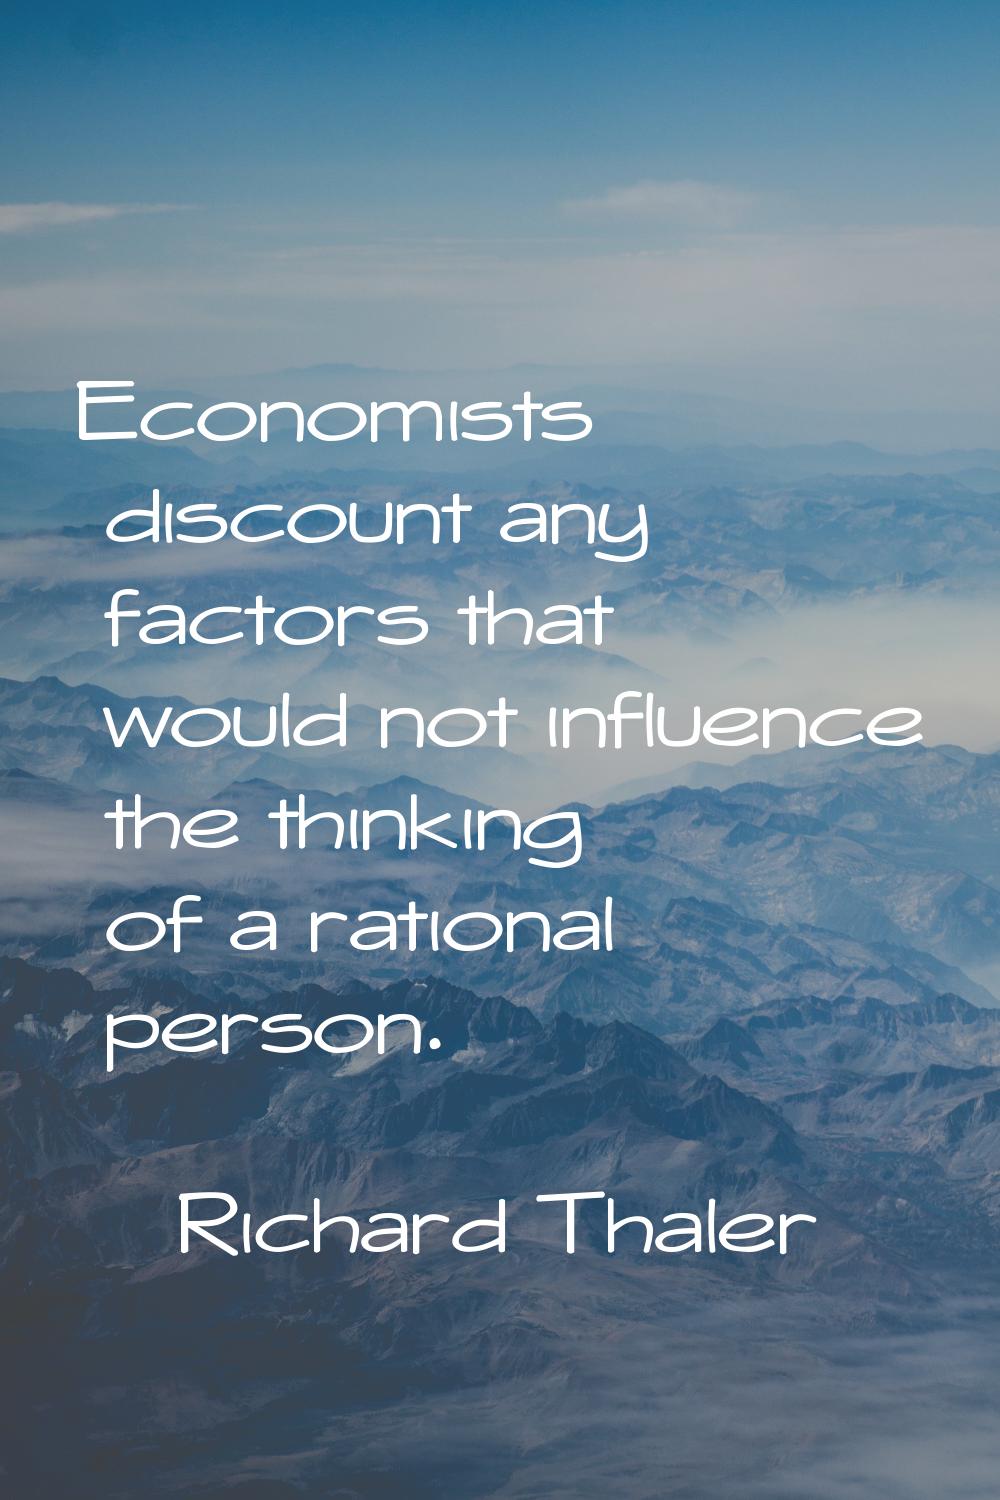 Economists discount any factors that would not influence the thinking of a rational person.